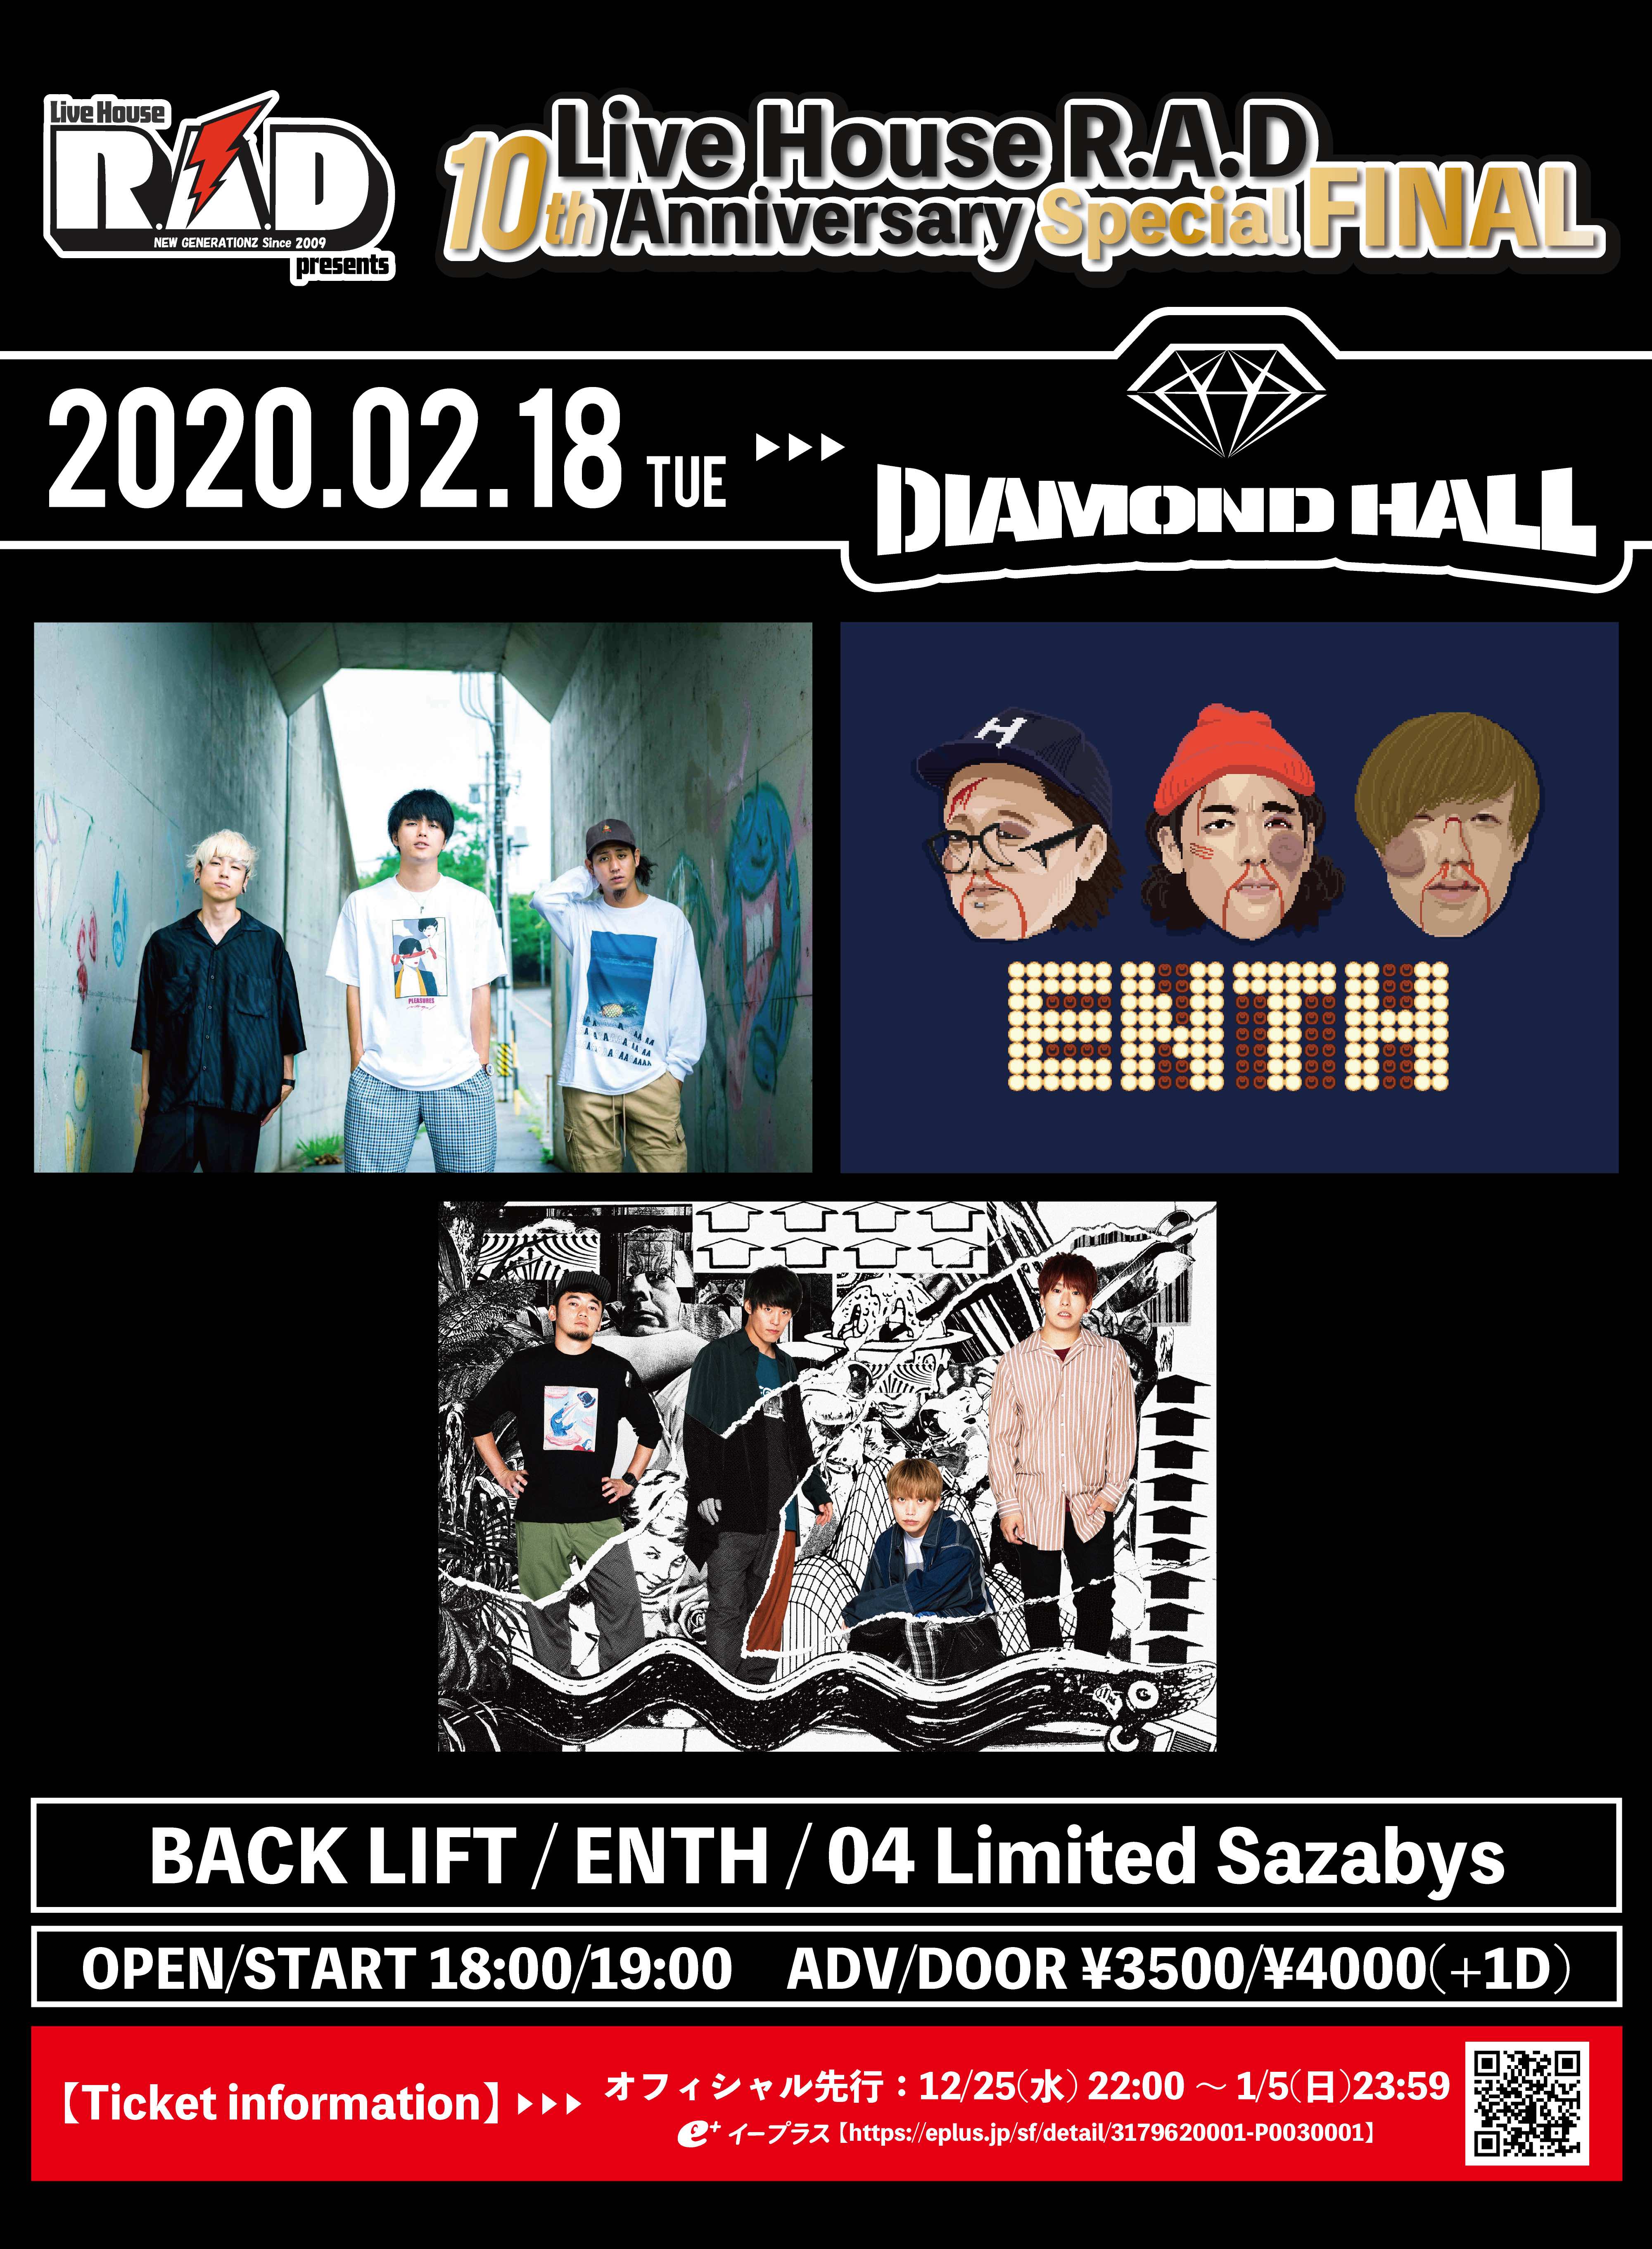 "Live House R.A.D 10th Anniversary Special Final" 出演決定！